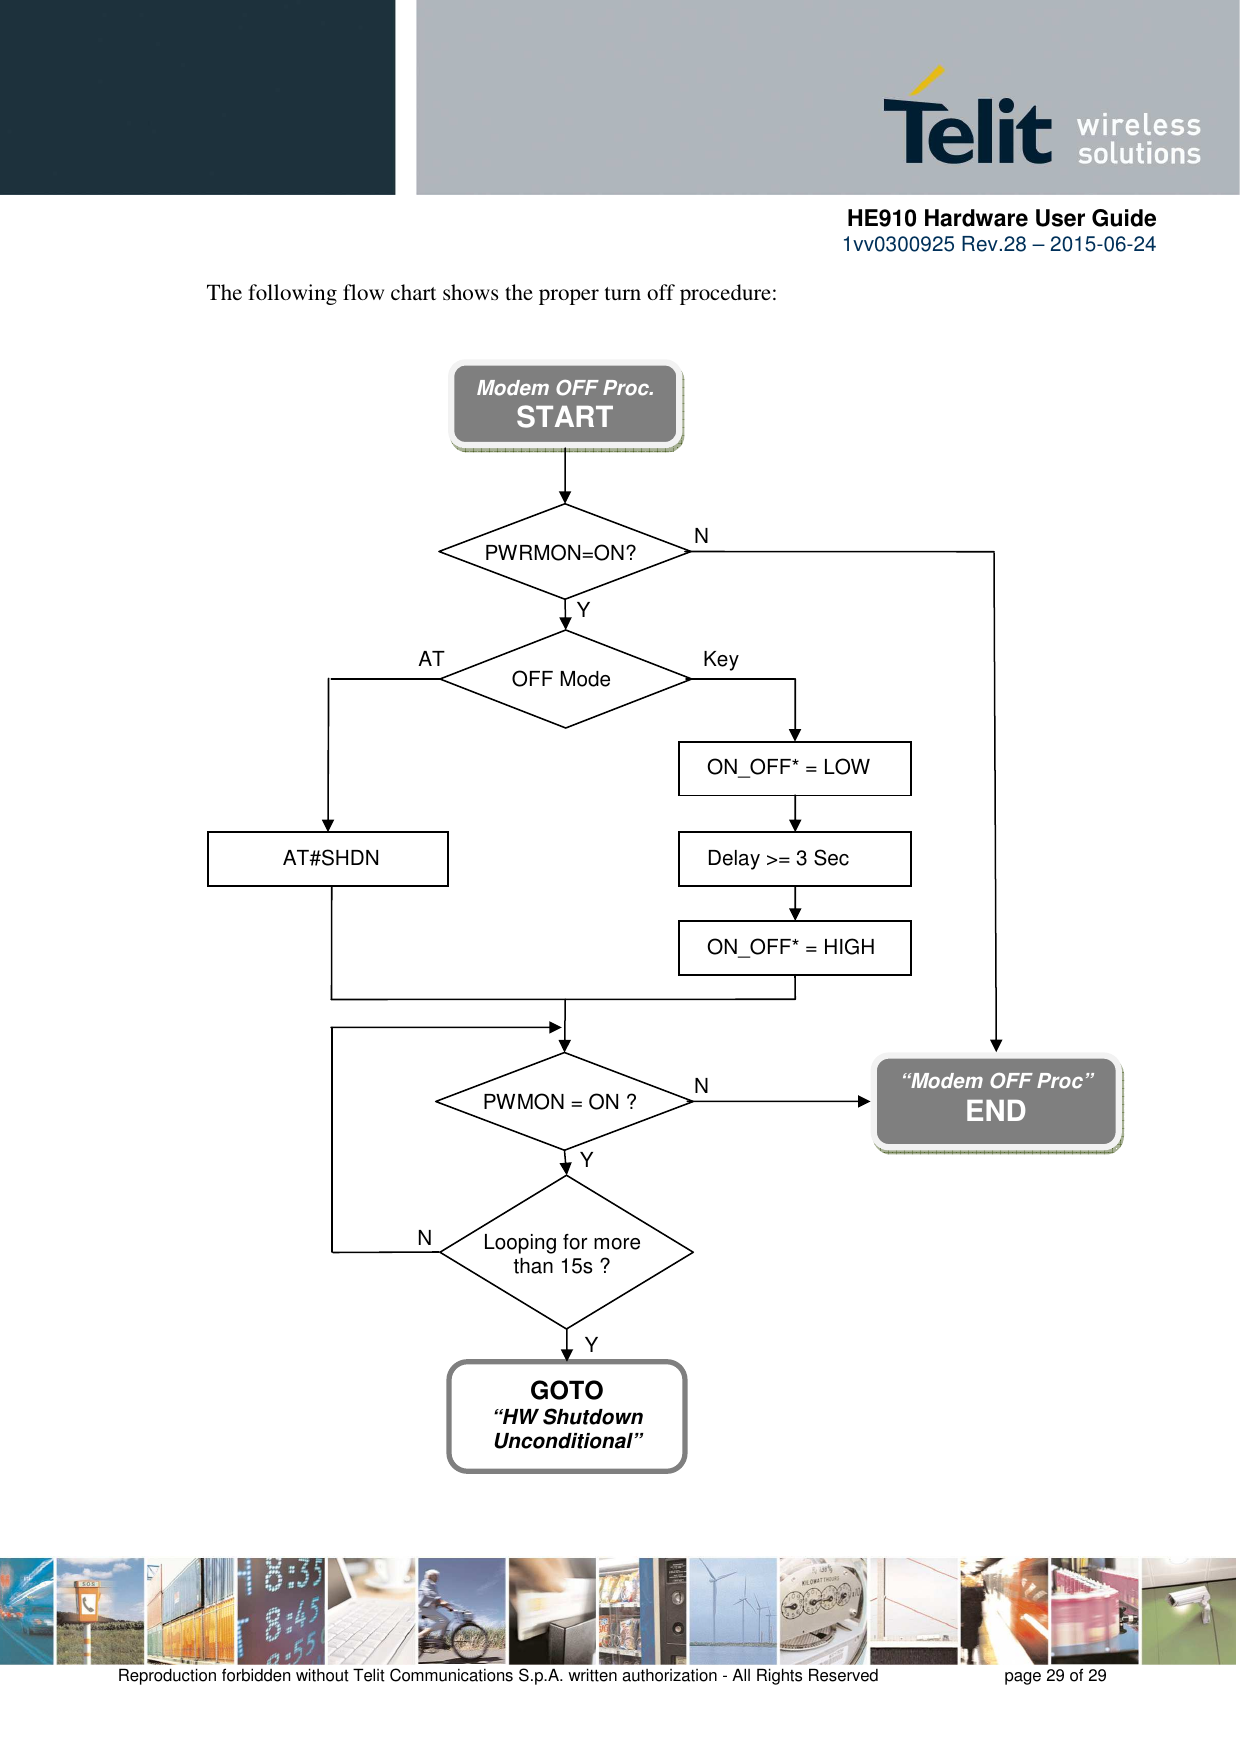      HE910 Hardware User Guide 1vv0300925 Rev.28 – 2015-06-24    Reproduction forbidden without Telit Communications S.p.A. written authorization - All Rights Reserved    page 29 of 29   The following flow chart shows the proper turn off procedure:     Modem OFF Proc. START AT Y N PWMON = ON ? OFF Mode ON_OFF* = LOW Delay &gt;= 3 Sec ON_OFF* = HIGH “Modem OFF Proc” END PWRMON=ON?  Y N Key AT#SHDN GOTO “HW Shutdown Unconditional” Looping for more  than 15s ? Y N 